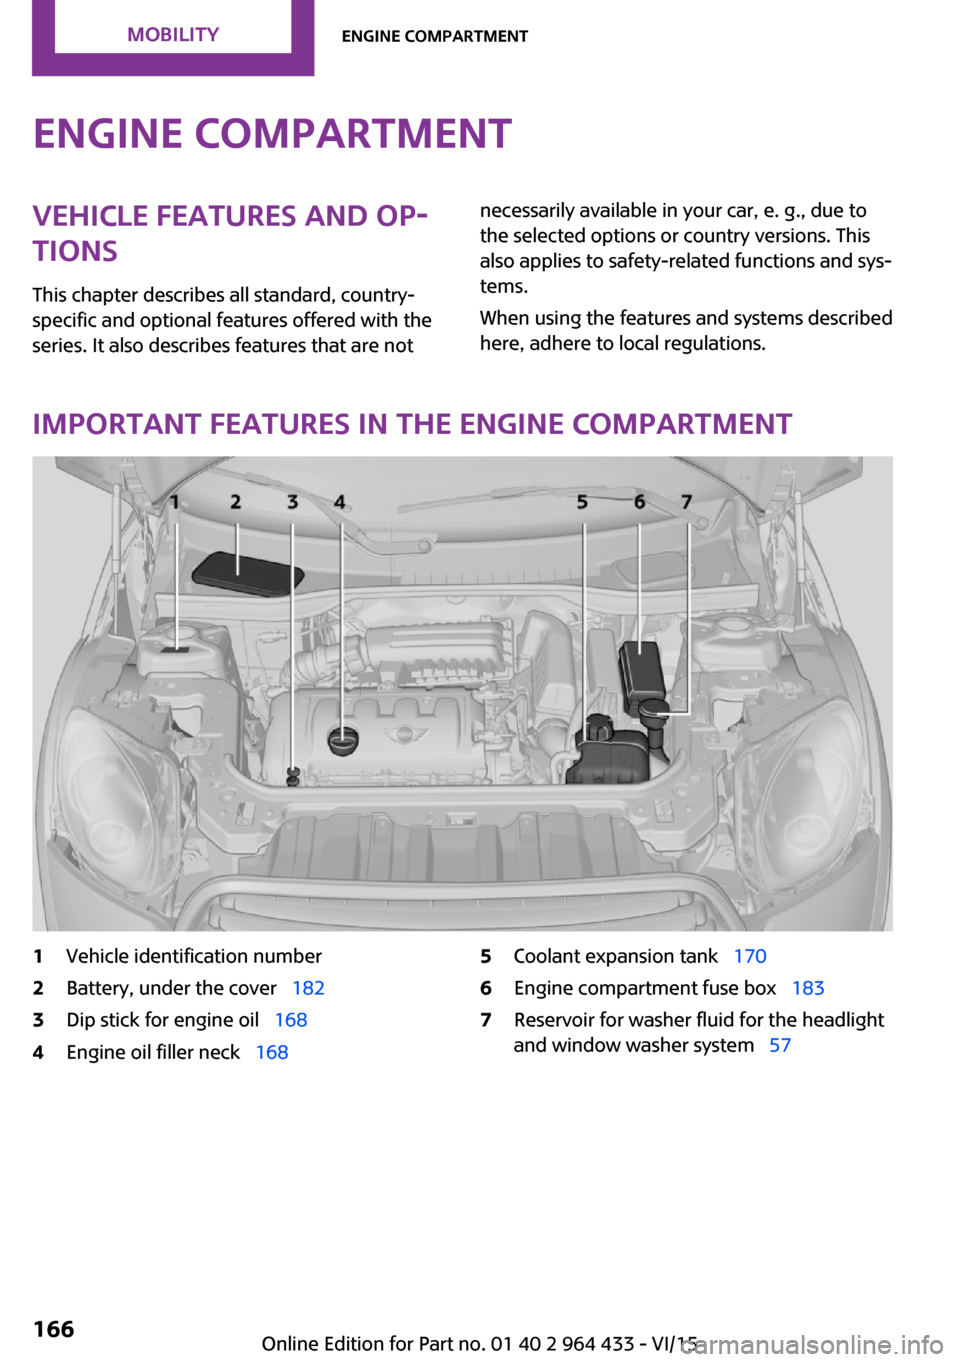 MINI Paceman 2016   (Mini Connected) Service Manual Engine compartmentVehicle features and op‐
tions
This chapter describes all standard, country-
specific and optional features offered with the series. It also describes features that are notnecessar